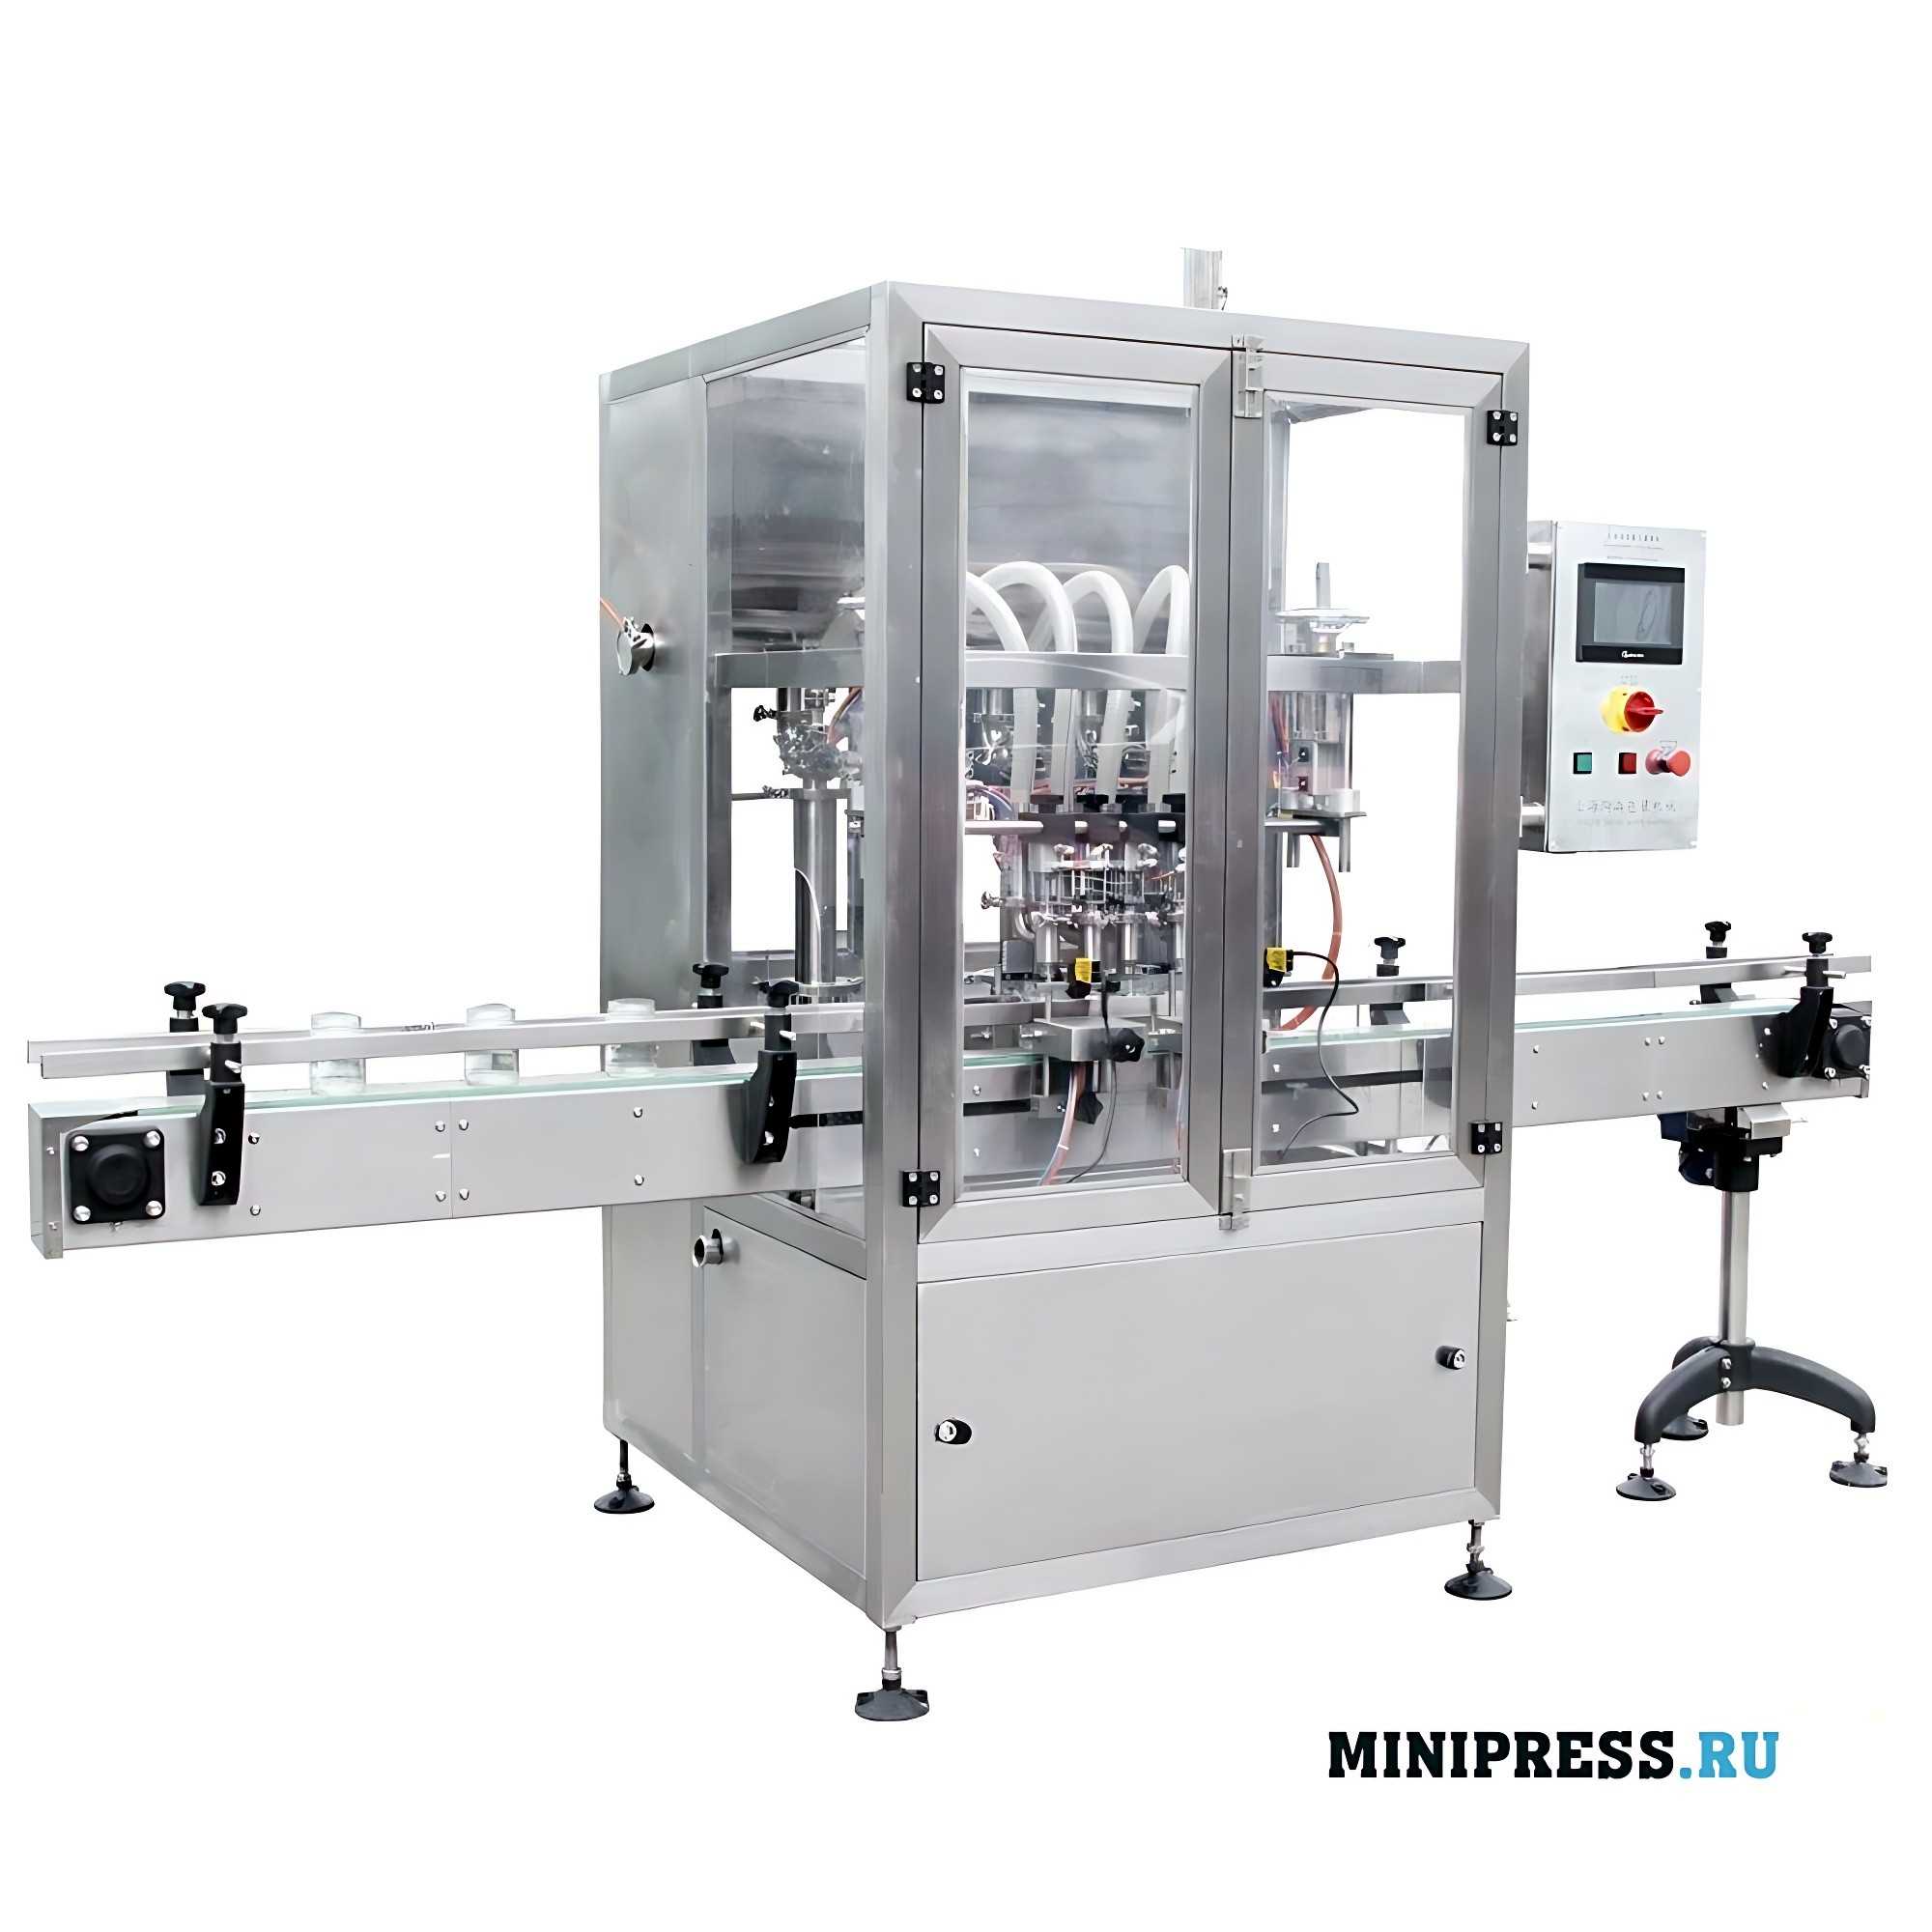 Linear air rinse for plastic and glass bottles YF 8